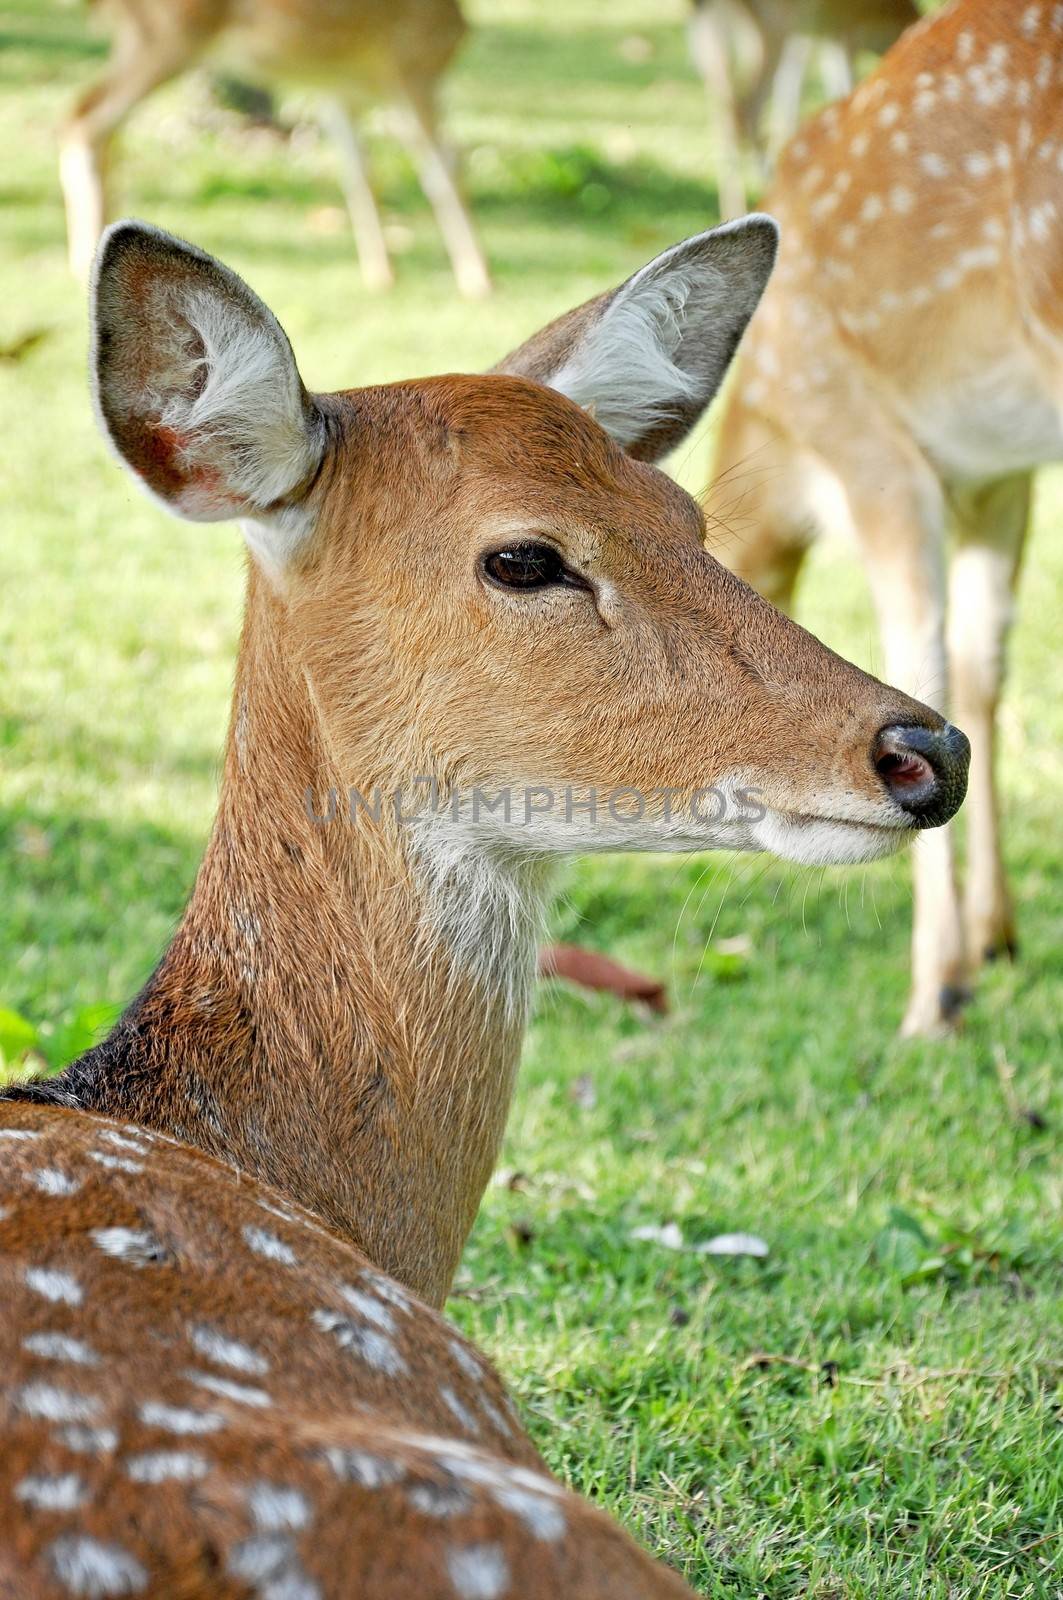 Sika females carry a pair of distinctive black bumps on the forehead.